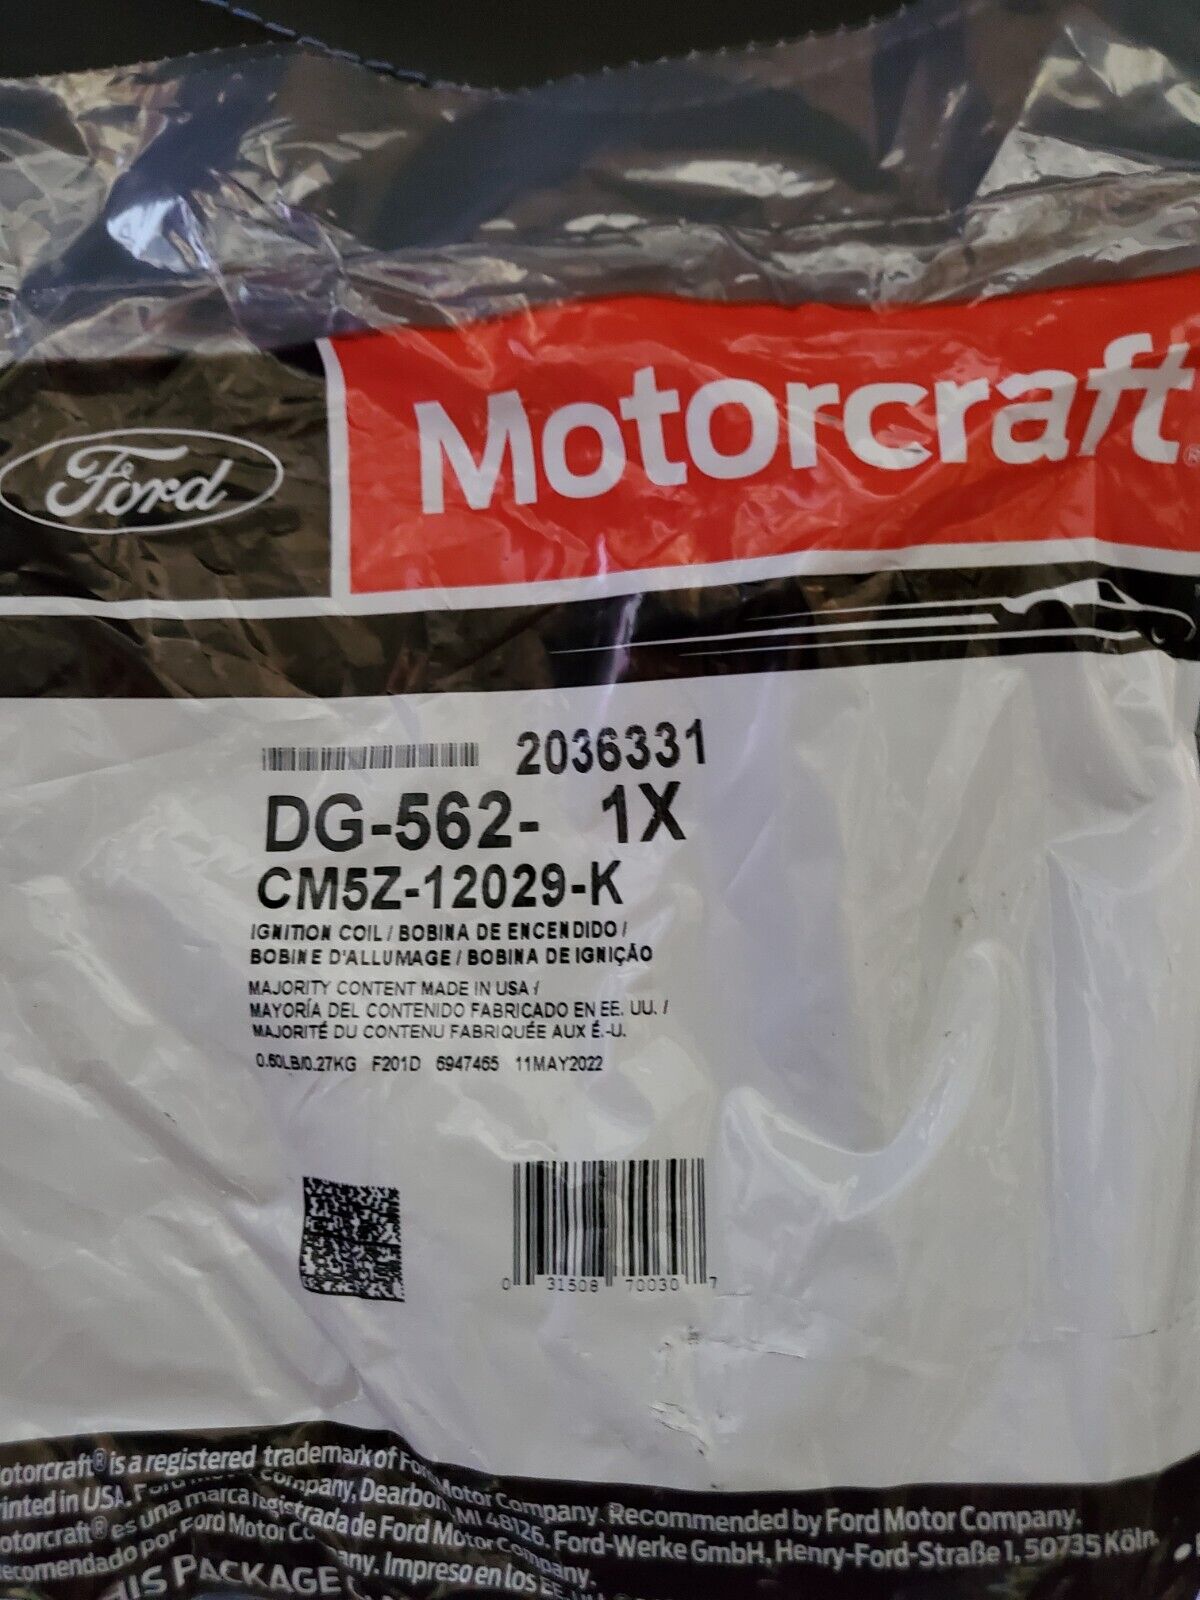 4 BRAND NEW DG562 MOTORCRAFT COILS IN SEALED FACTORY BAGS NEW  STOCK